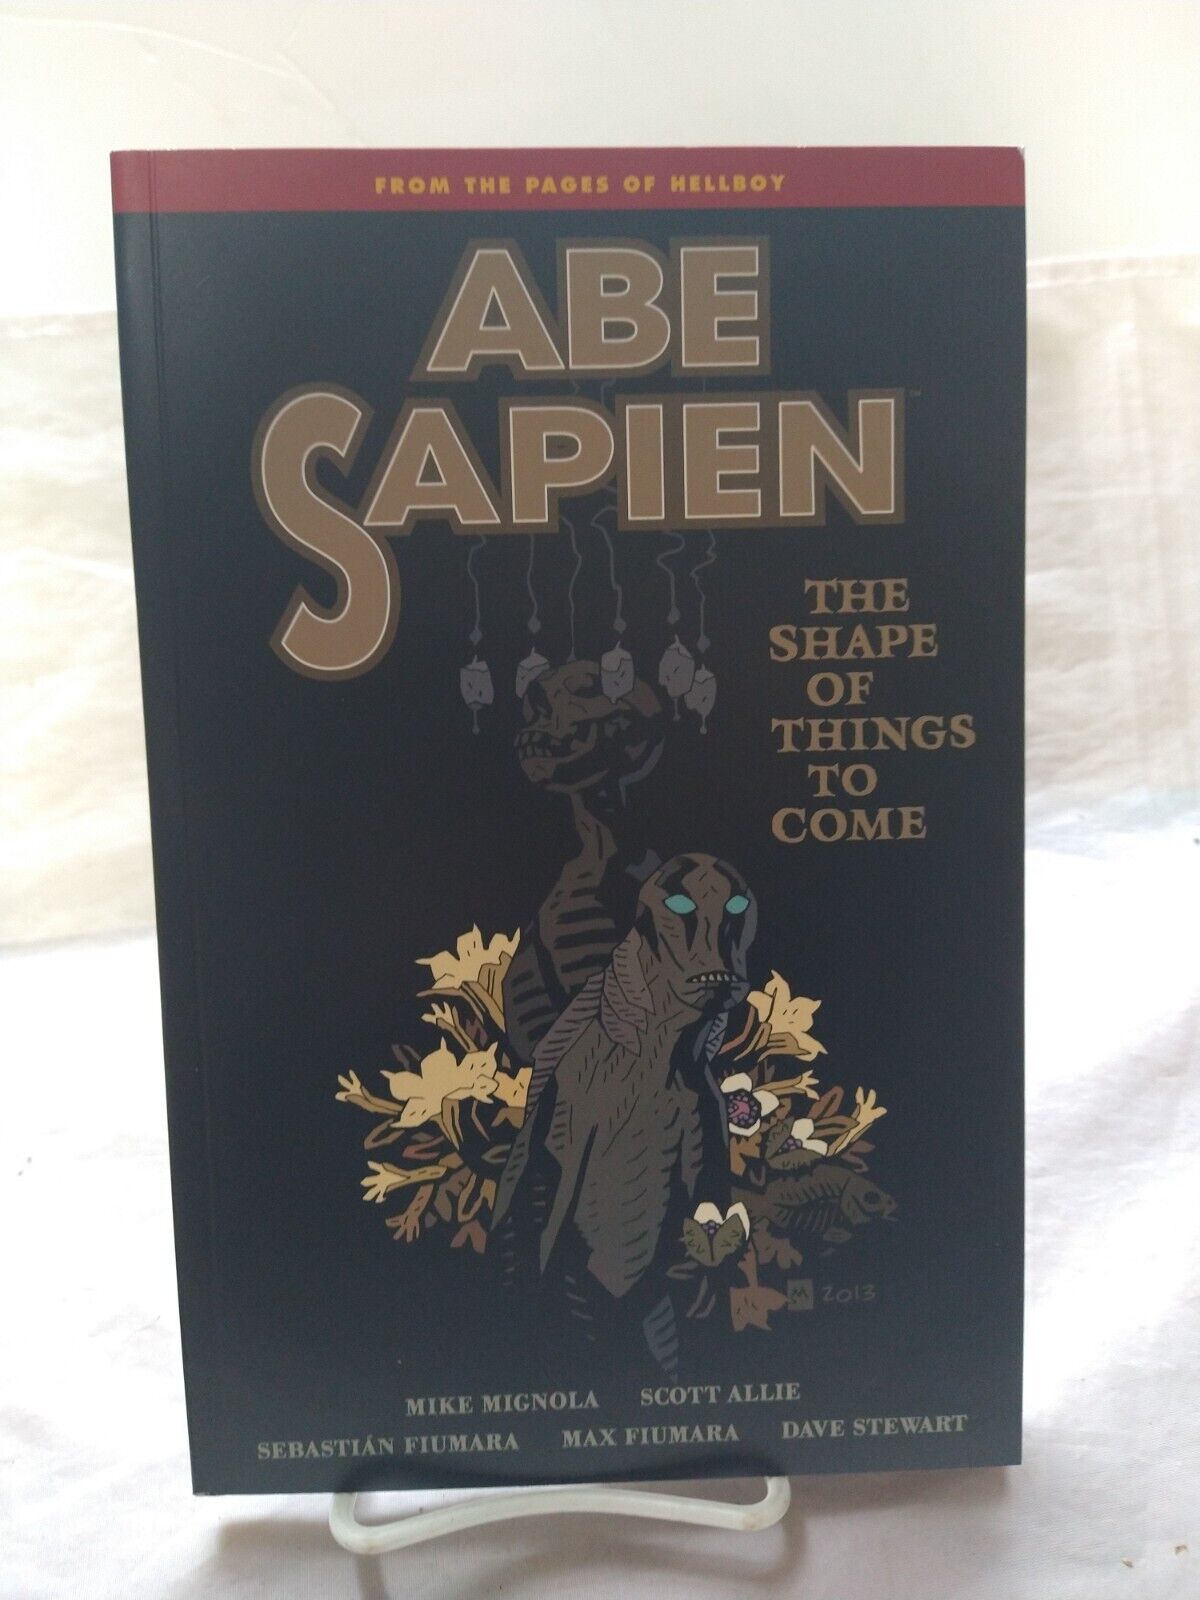 Abe Sapien Volume 4 The Shape of Things to Come Trade Paperback Mike Mignola